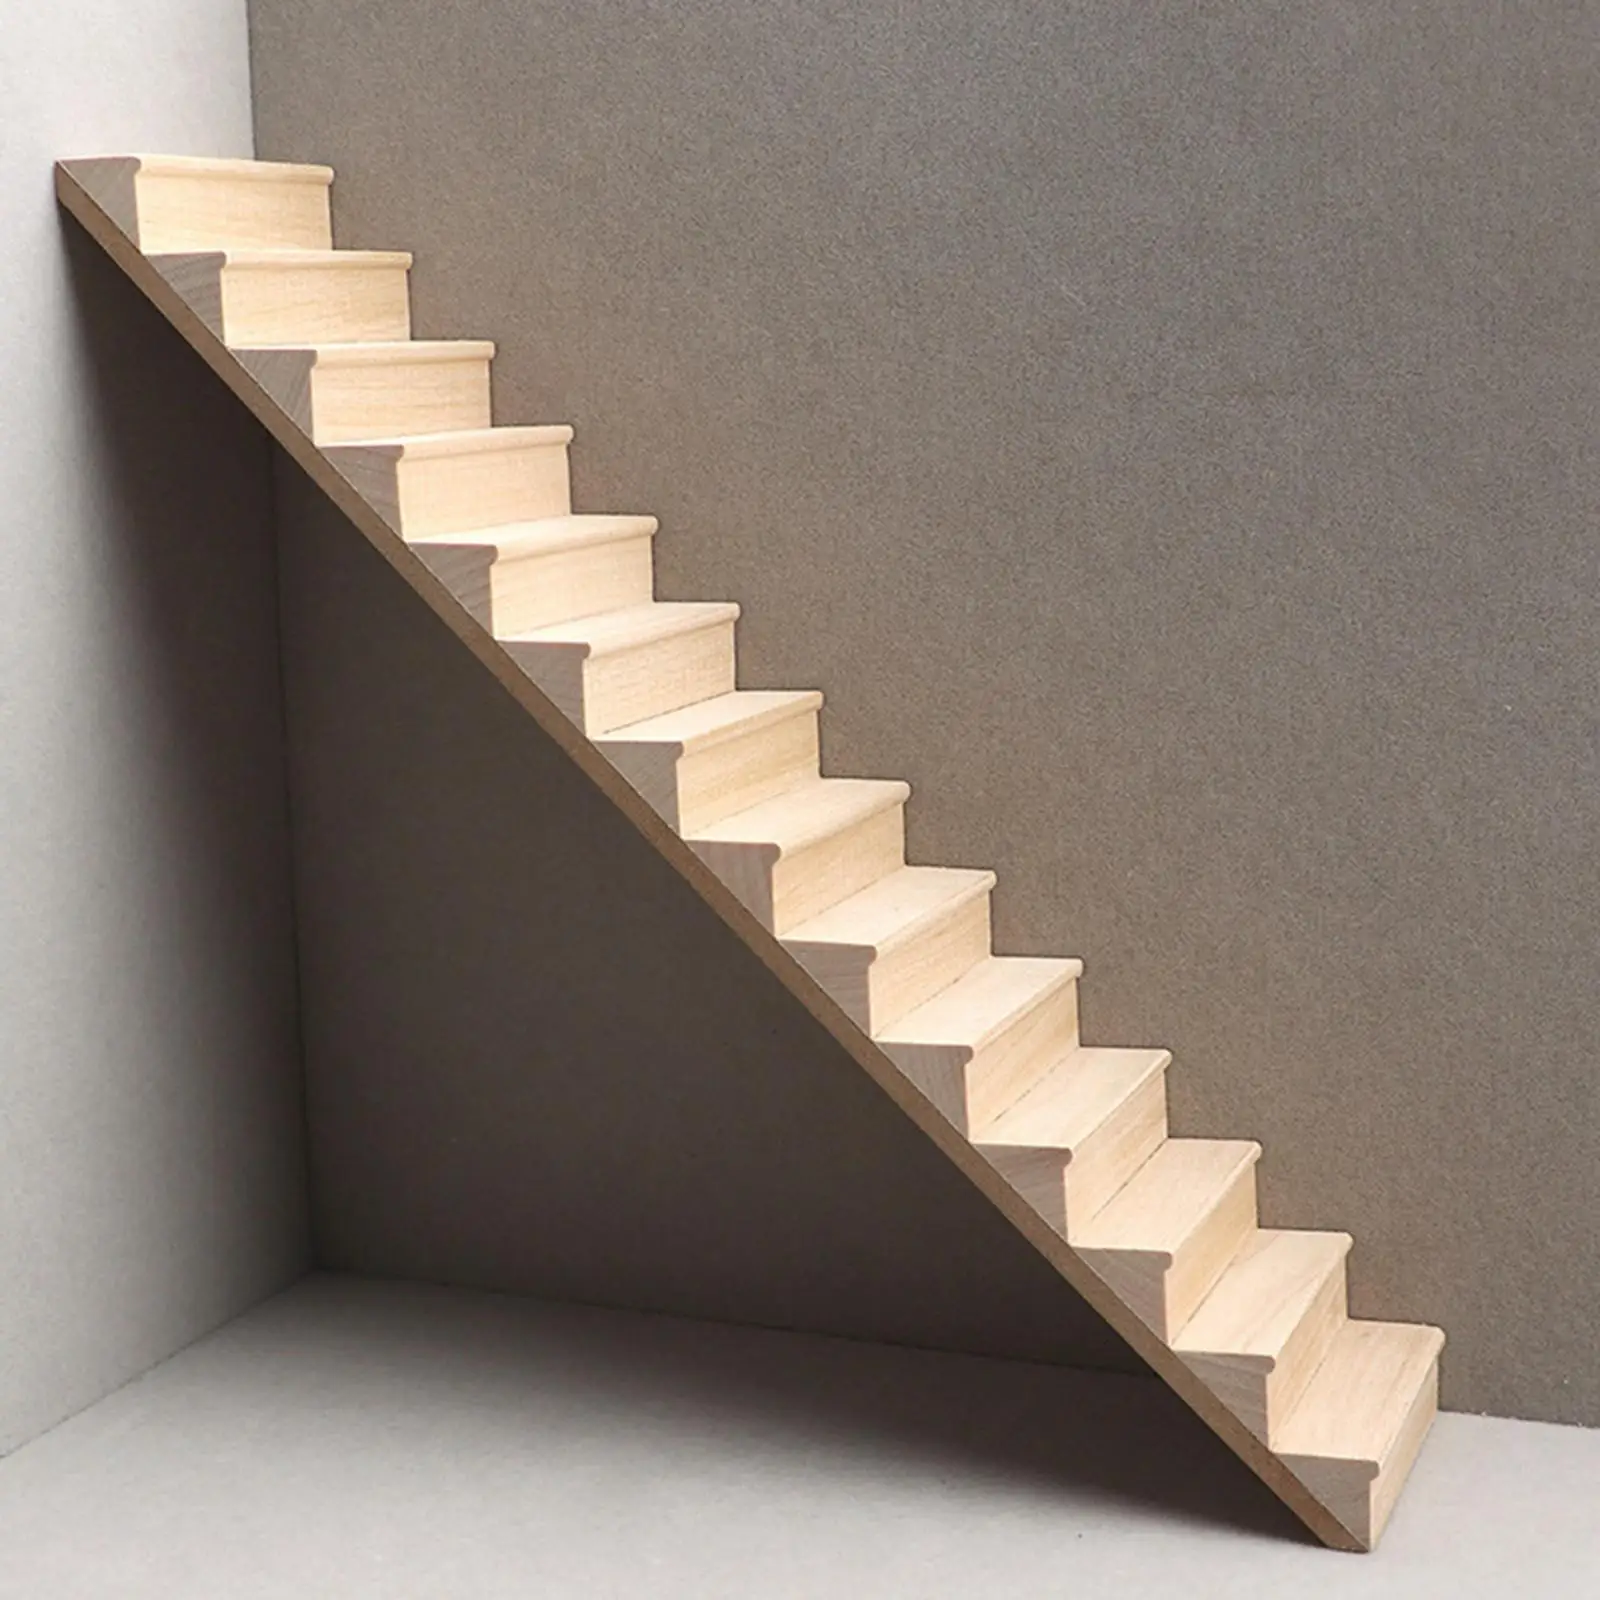 1:12 Dollhouse Straight Staircase Craft for Architectural DIY Projects